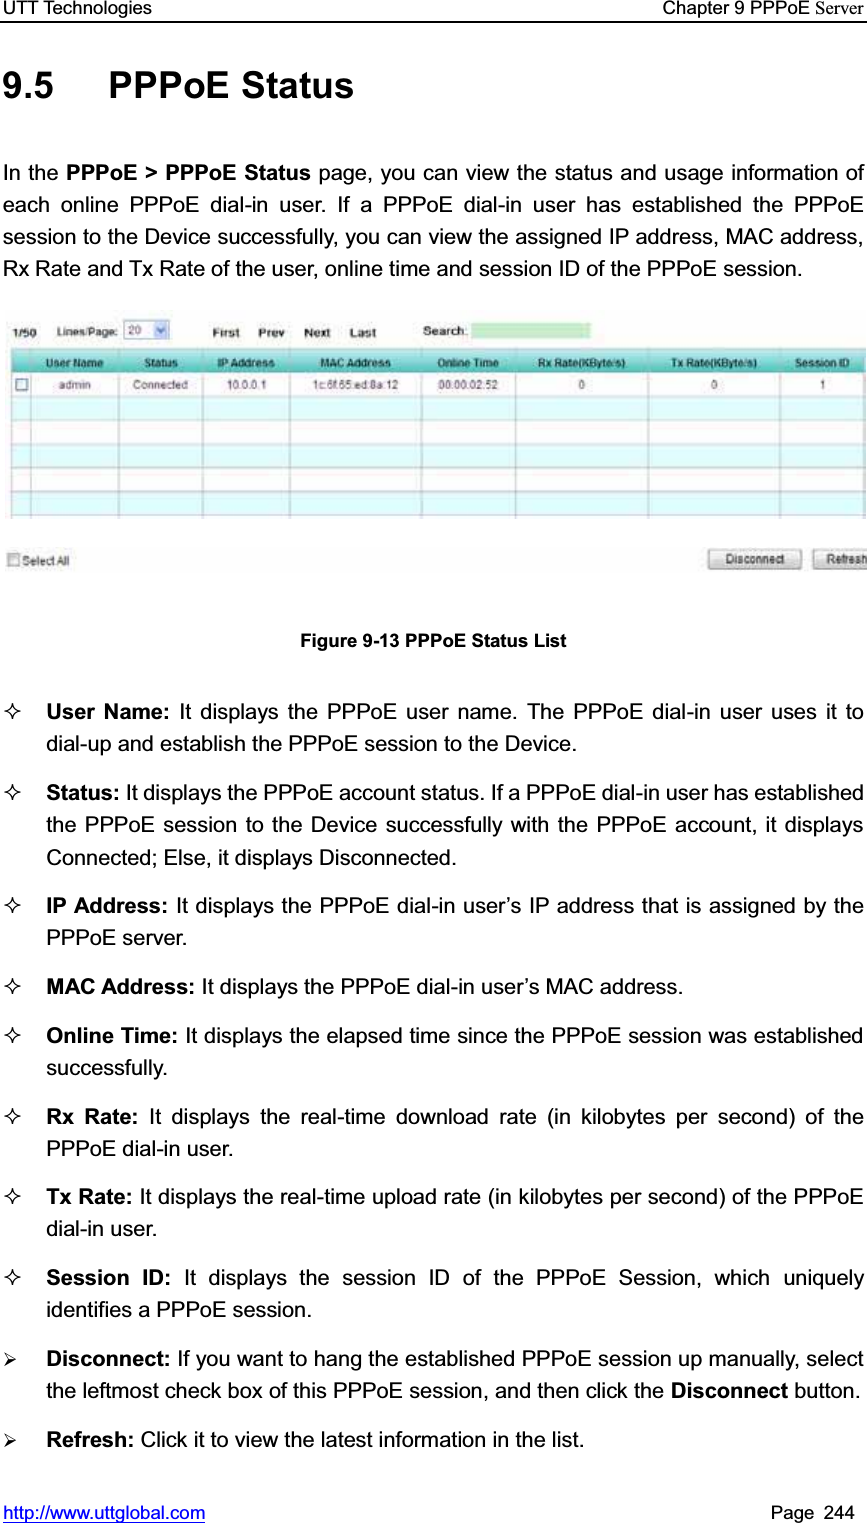 UTT Technologies    Chapter 9 PPPoE Serverhttp://www.uttglobal.com Page 244 9.5 PPPoE Status In the PPPoE &gt; PPPoE Status page, you can view the status and usage information of each online PPPoE dial-in user. If a PPPoE dial-in user has established the PPPoE session to the Device successfully, you can view the assigned IP address, MAC address, Rx Rate and Tx Rate of the user, online time and session ID of the PPPoE session. Figure 9-13 PPPoE Status List User Name: It displays the PPPoE user name. The PPPoE dial-in user uses it to dial-up and establish the PPPoE session to the Device.   Status: It displays the PPPoE account status. If a PPPoE dial-in user has establishedthe PPPoE session to the Device successfully with the PPPoE account, it displays Connected; Else, it displays Disconnected. IP Address: It displays the PPPoE dial-in user¶s IP address that is assigned by the PPPoE server. MAC Address: It displays the PPPoE dial-in user¶s MAC address. Online Time: It displays the elapsed time since the PPPoE session was establishedsuccessfully.  Rx Rate: It displays the real-time download rate (in kilobytes per second) of the PPPoE dial-in user. Tx Rate: It displays the real-time upload rate (in kilobytes per second) of the PPPoE dial-in user. Session ID: It displays the session ID of the PPPoE Session, which uniquely identifies a PPPoE session.   ¾Disconnect: If you want to hang the established PPPoE session up manually, select the leftmost check box of this PPPoE session, and then click the Disconnect button.¾Refresh: Click it to view the latest information in the list.